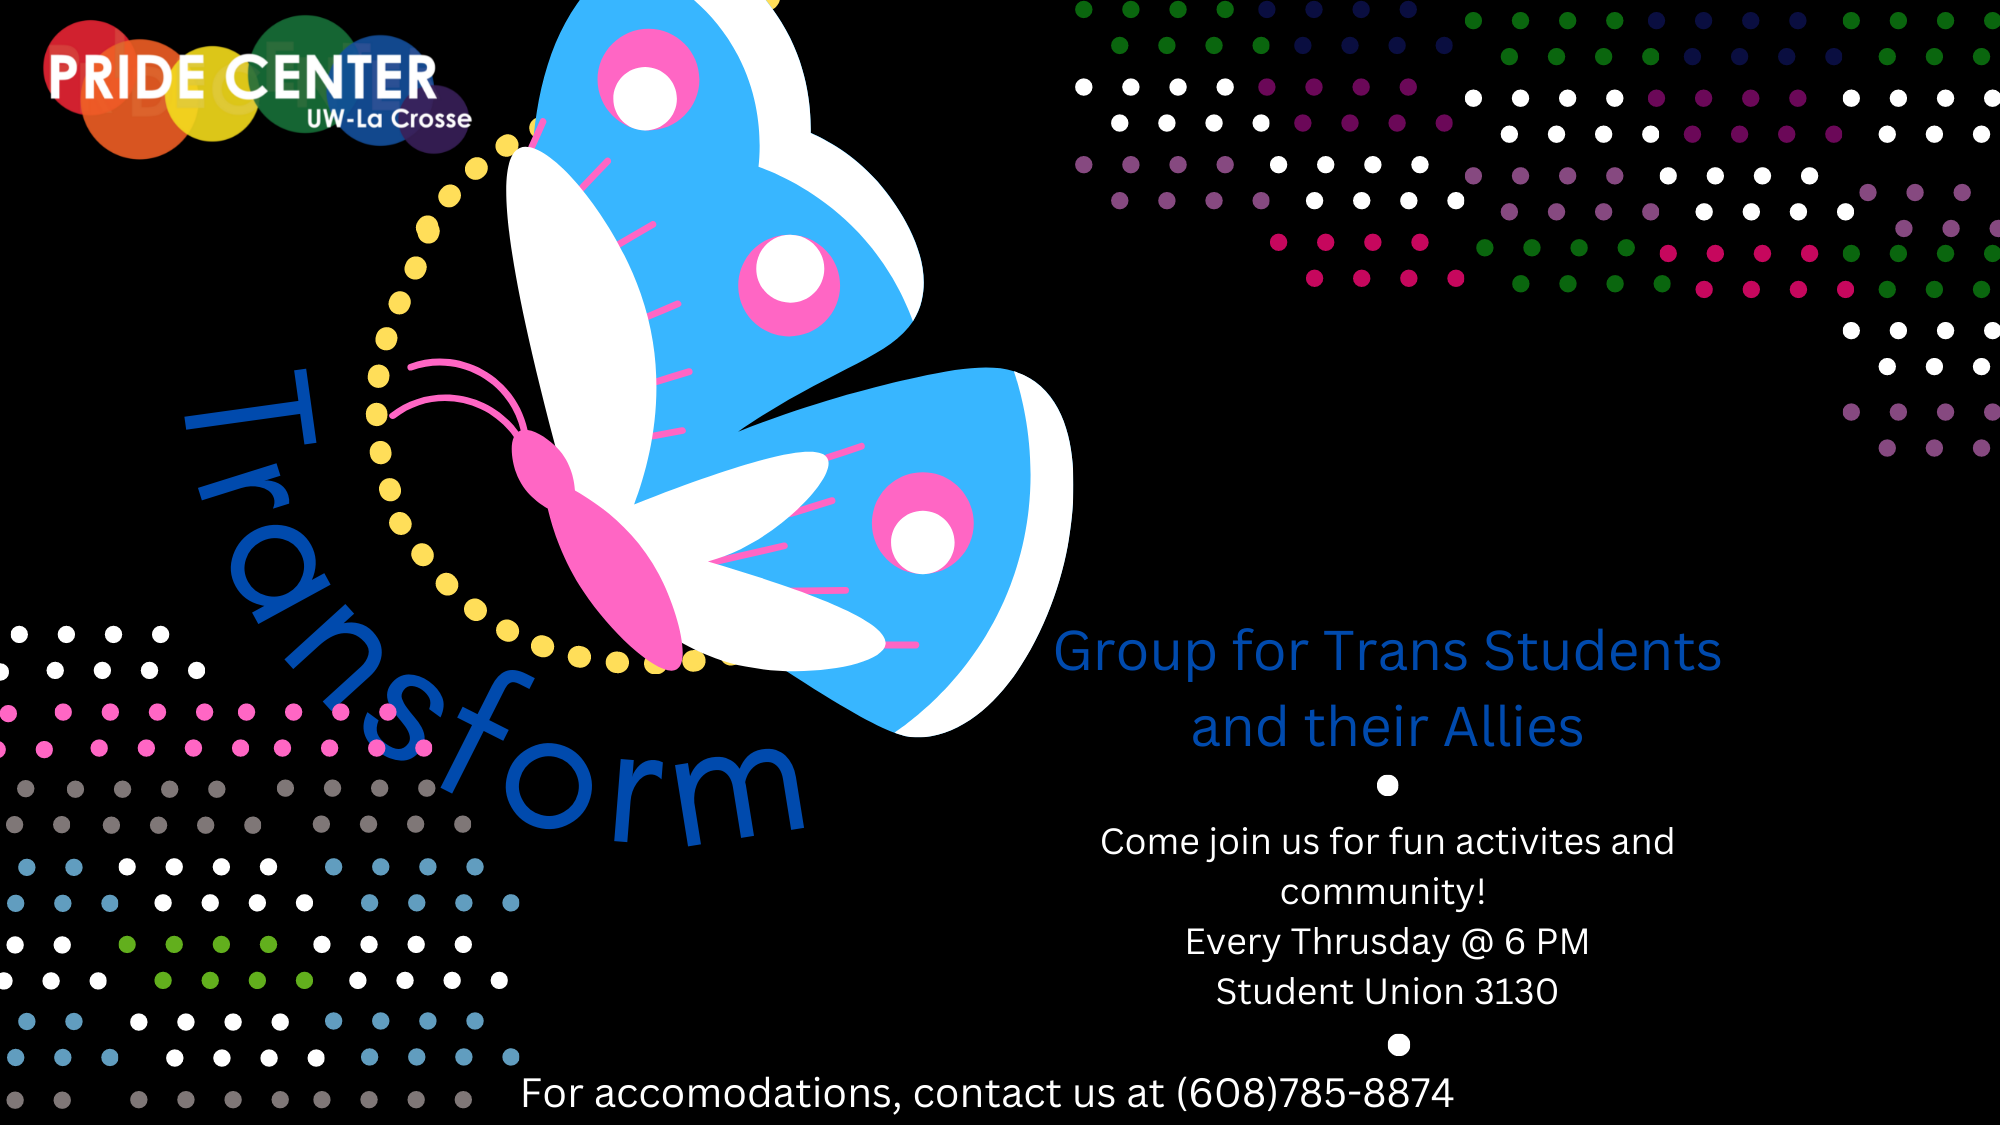 Group for Trans Students and Allies  | Thursdays @ 6pm in Student Union 3320 